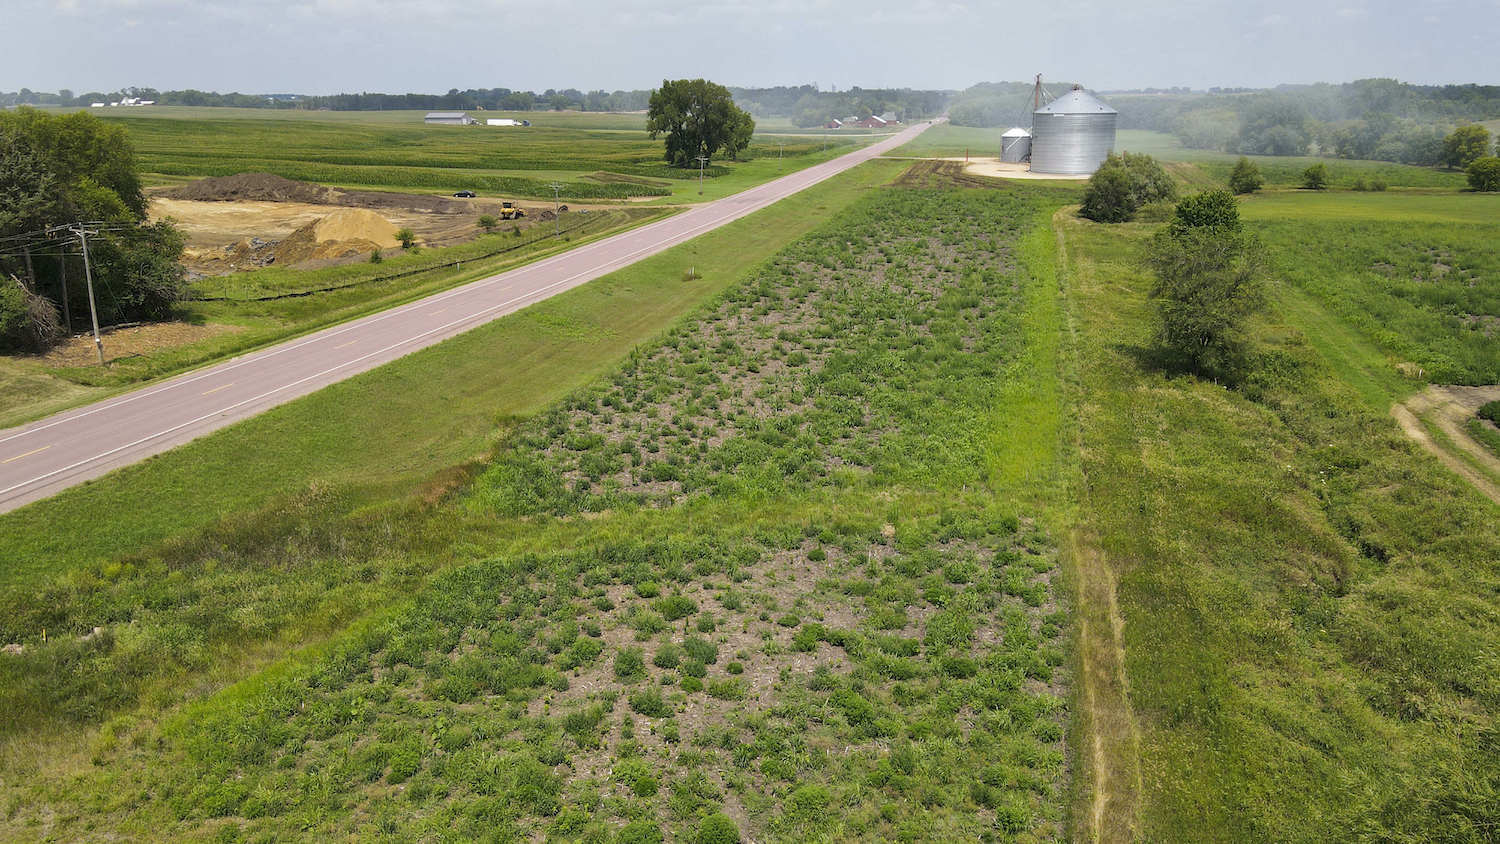 The future location of the temperature-enhanced bioreactor which is to extract nitrates from field runoff before the water enters the Dutch Creek watershed and reaches the lake where drinking water is pulled for the Fairmont Water Treatment Plant, July 16, in Fairmont MN. August 2021